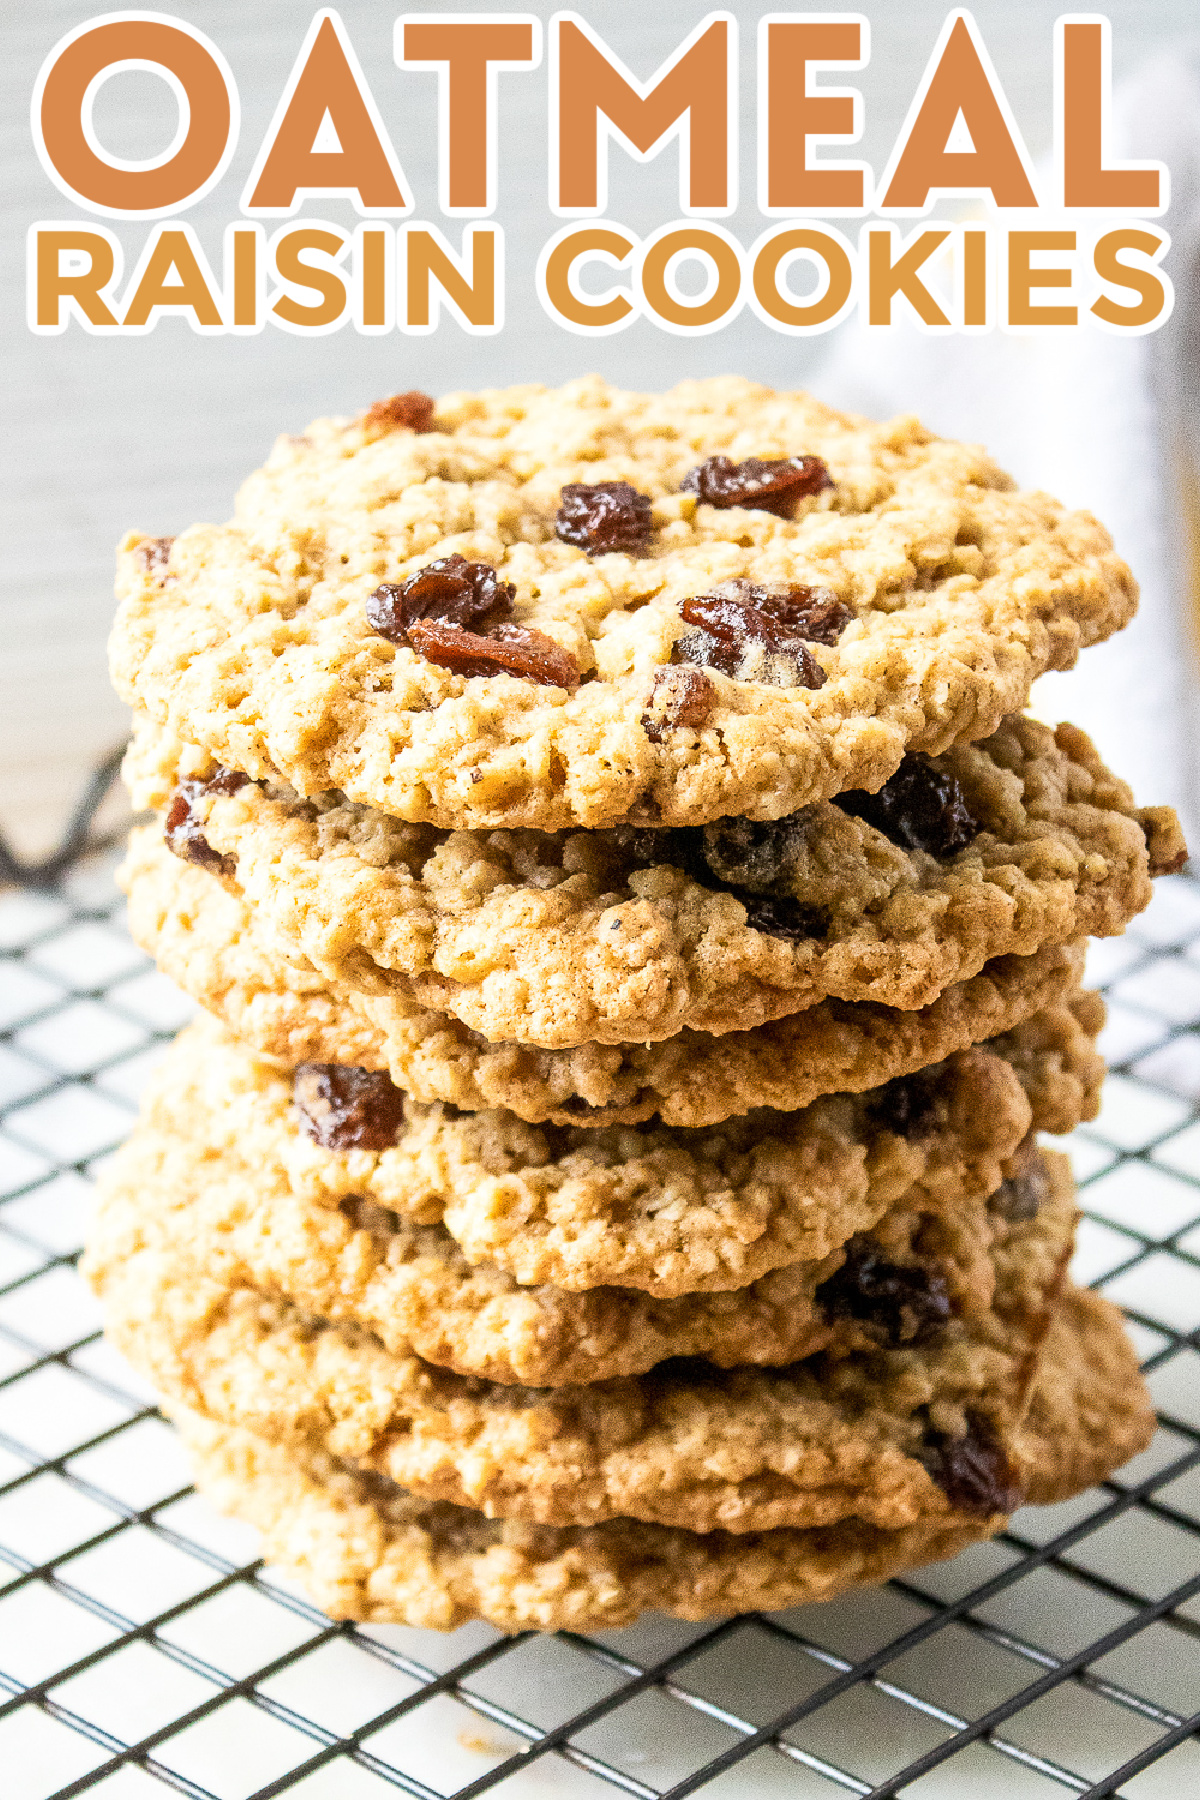 Looking for a delicious oatmeal raisin cookies recipe? Soft, chewy, and delicious oatmeal raisin cookies that are easy to make and delicious!